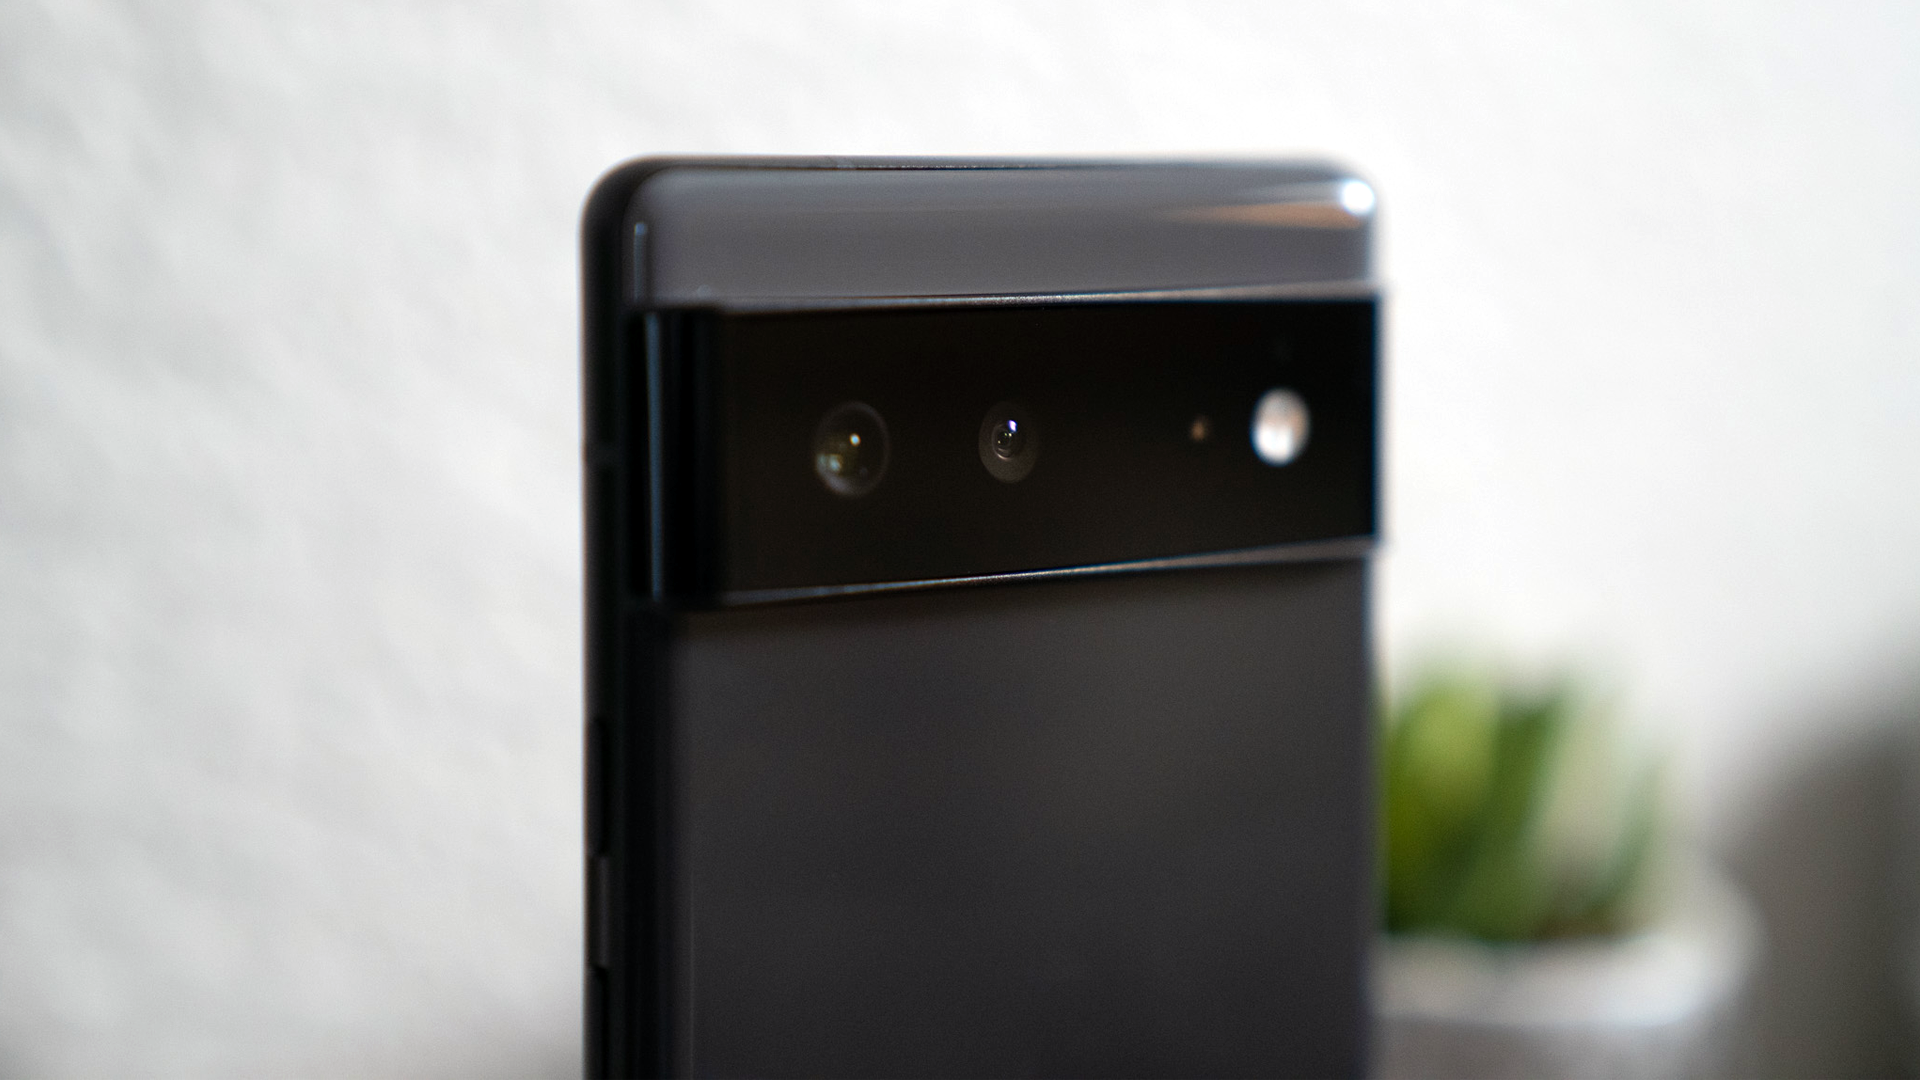 Close-up of the Pixel 6's camera bar on the back of the device